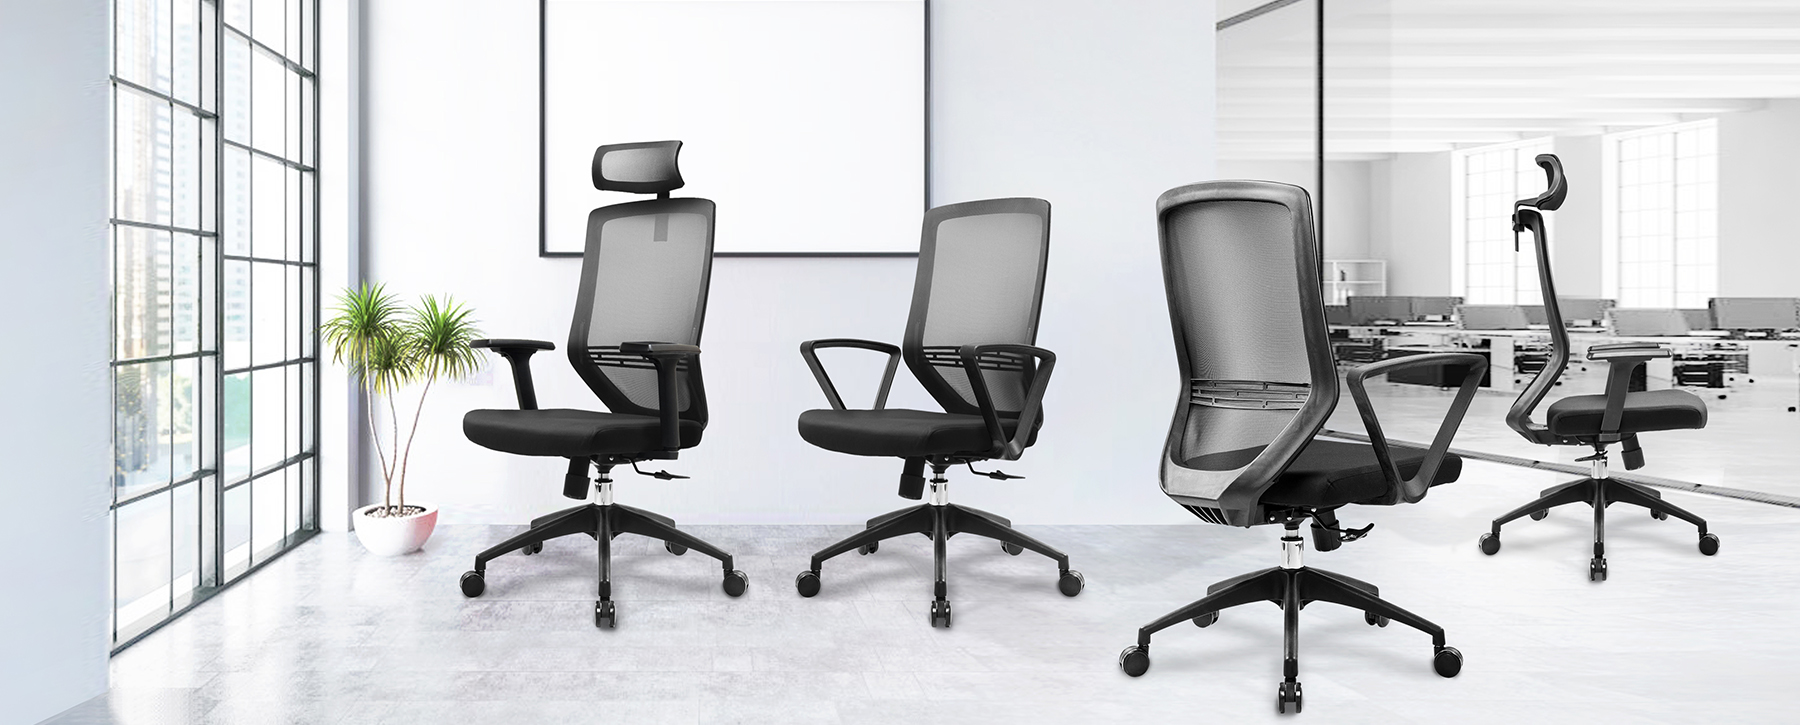 Office Chair Singapore - Ardent Office Furniture 